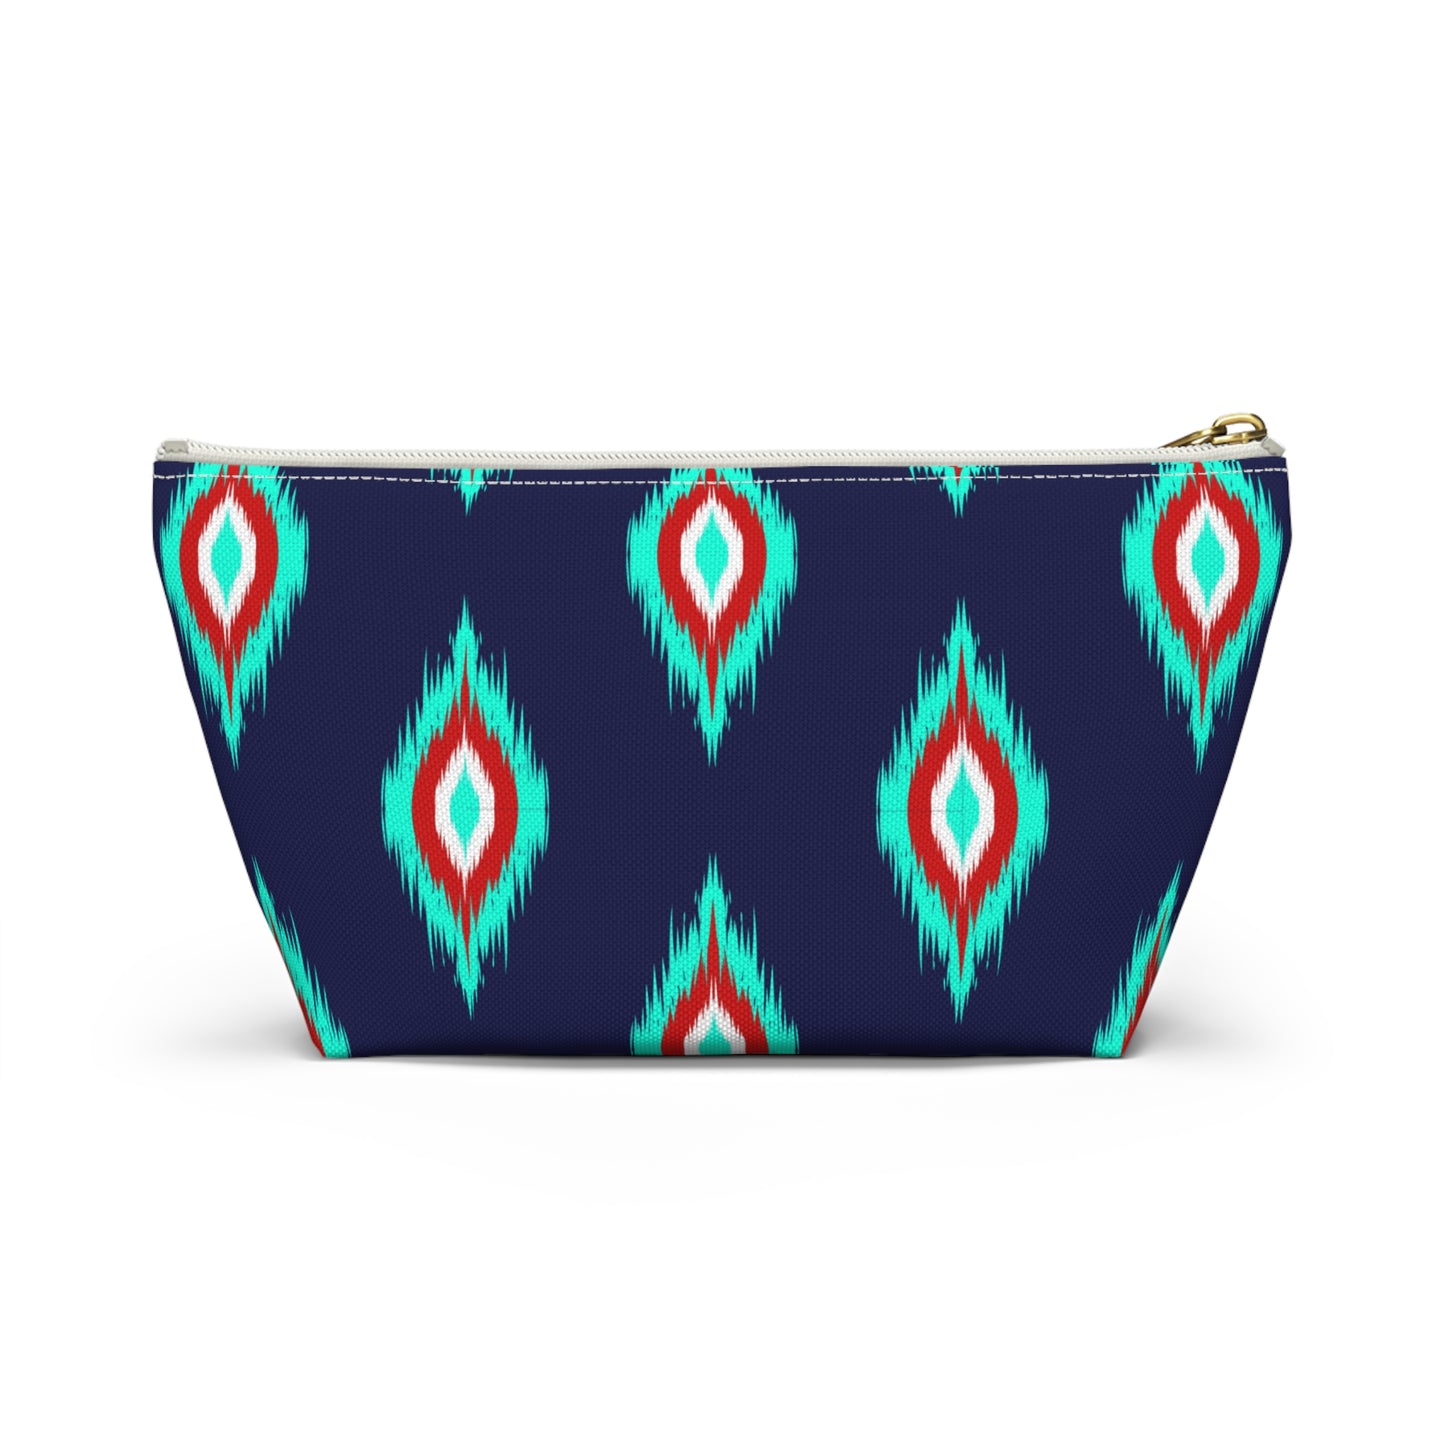 Mahjong Tile & Accessory Bag (T-bottom). Unique Colorful Mahjongg Accessory Pouch Large Enough for Tile Sets. Navy and Red IKAT Pattern.